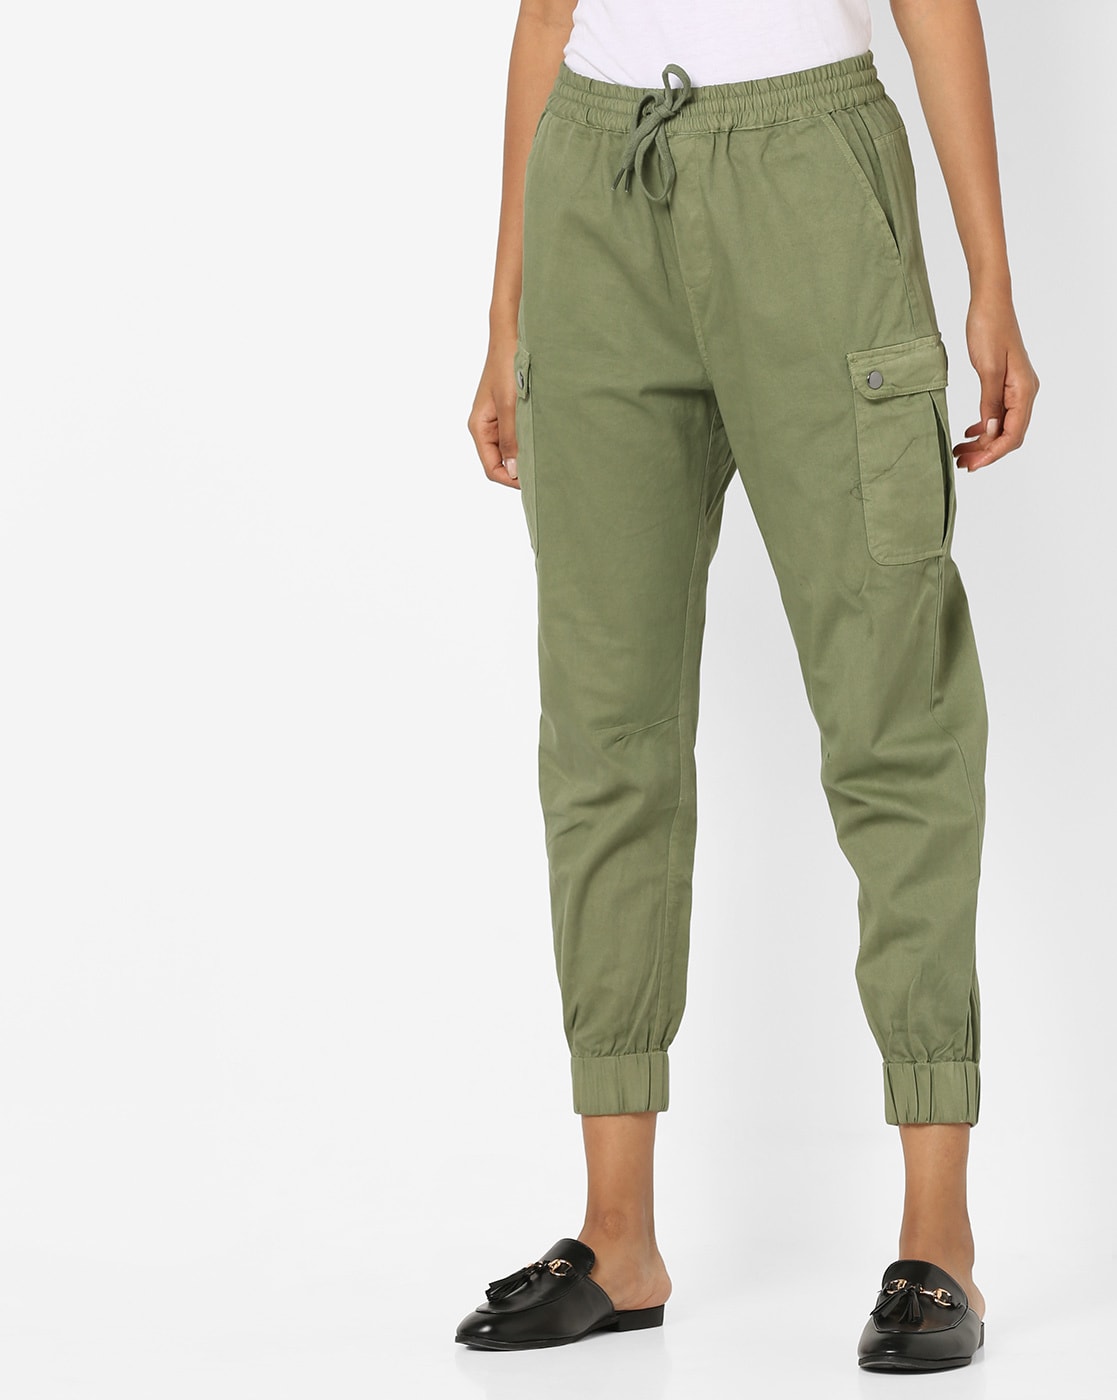 Buy Cream Trousers & Pants for Women by Ethnicity Online | Ajio.com